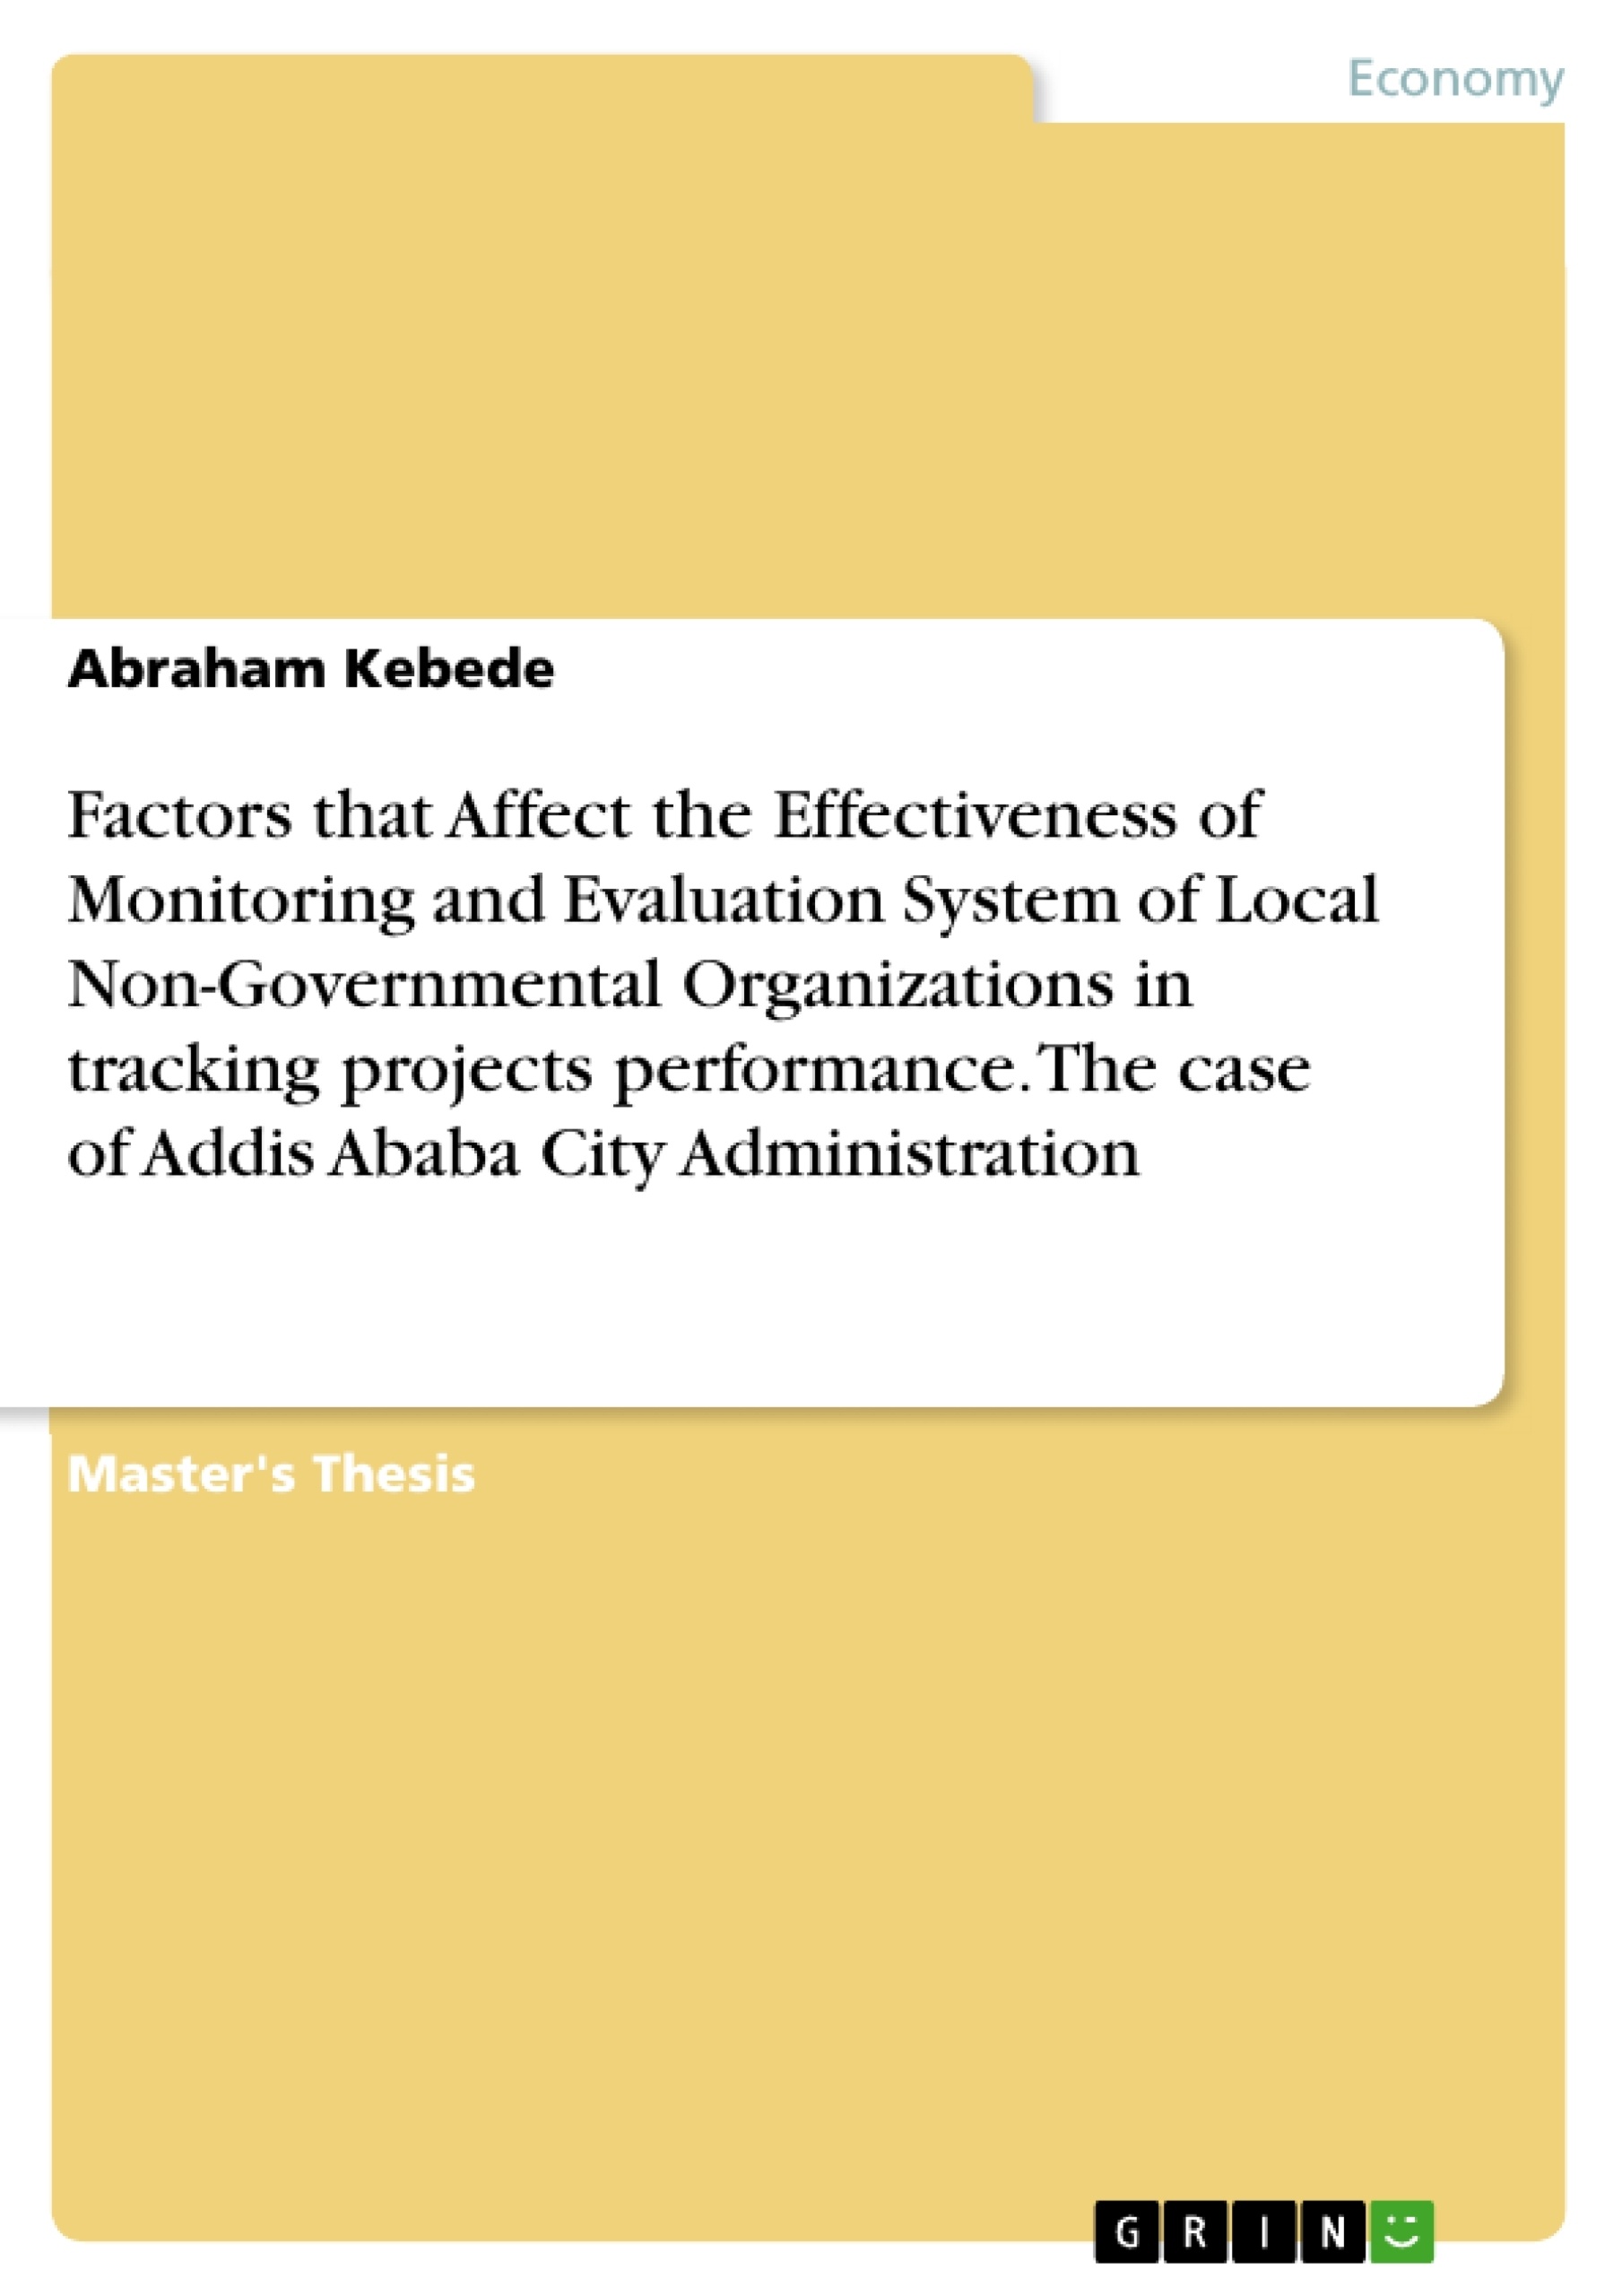 Title: Factors that Affect the Effectiveness of Monitoring and Evaluation System of Local Non-Governmental Organizations in tracking projects performance. The case of Addis Ababa City Administration